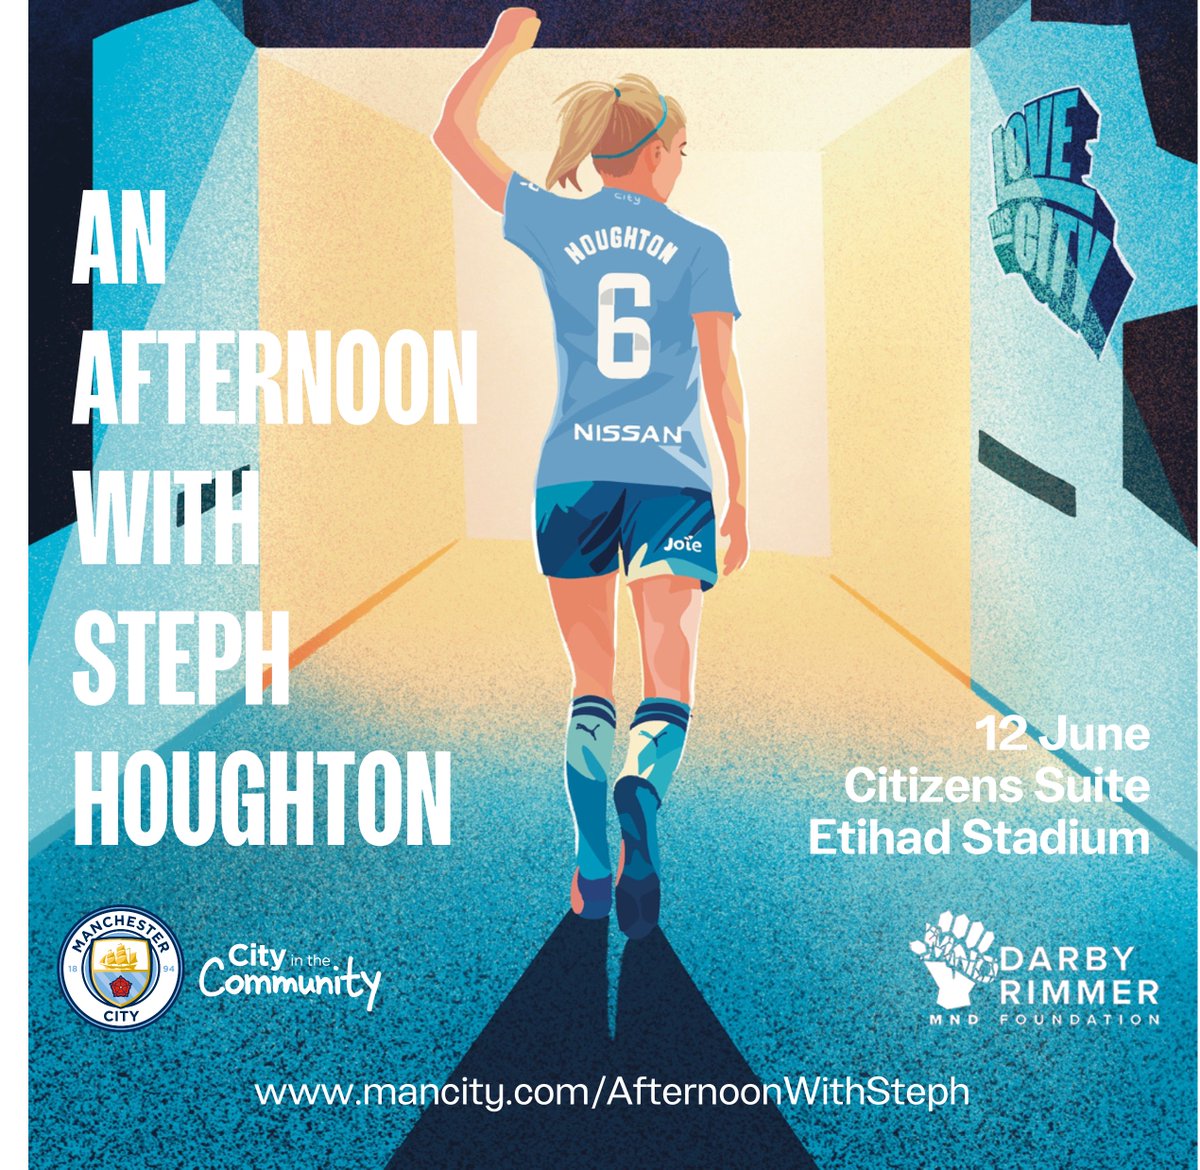 @citcmancity is delighted to announce ‘An Afternoon with Steph Houghton'. This will be an intimate event bringing supporters closer to the former @mancity and @lionesses captain. 💙📷 @stephhoughton2 | @DarbyRimmerMND